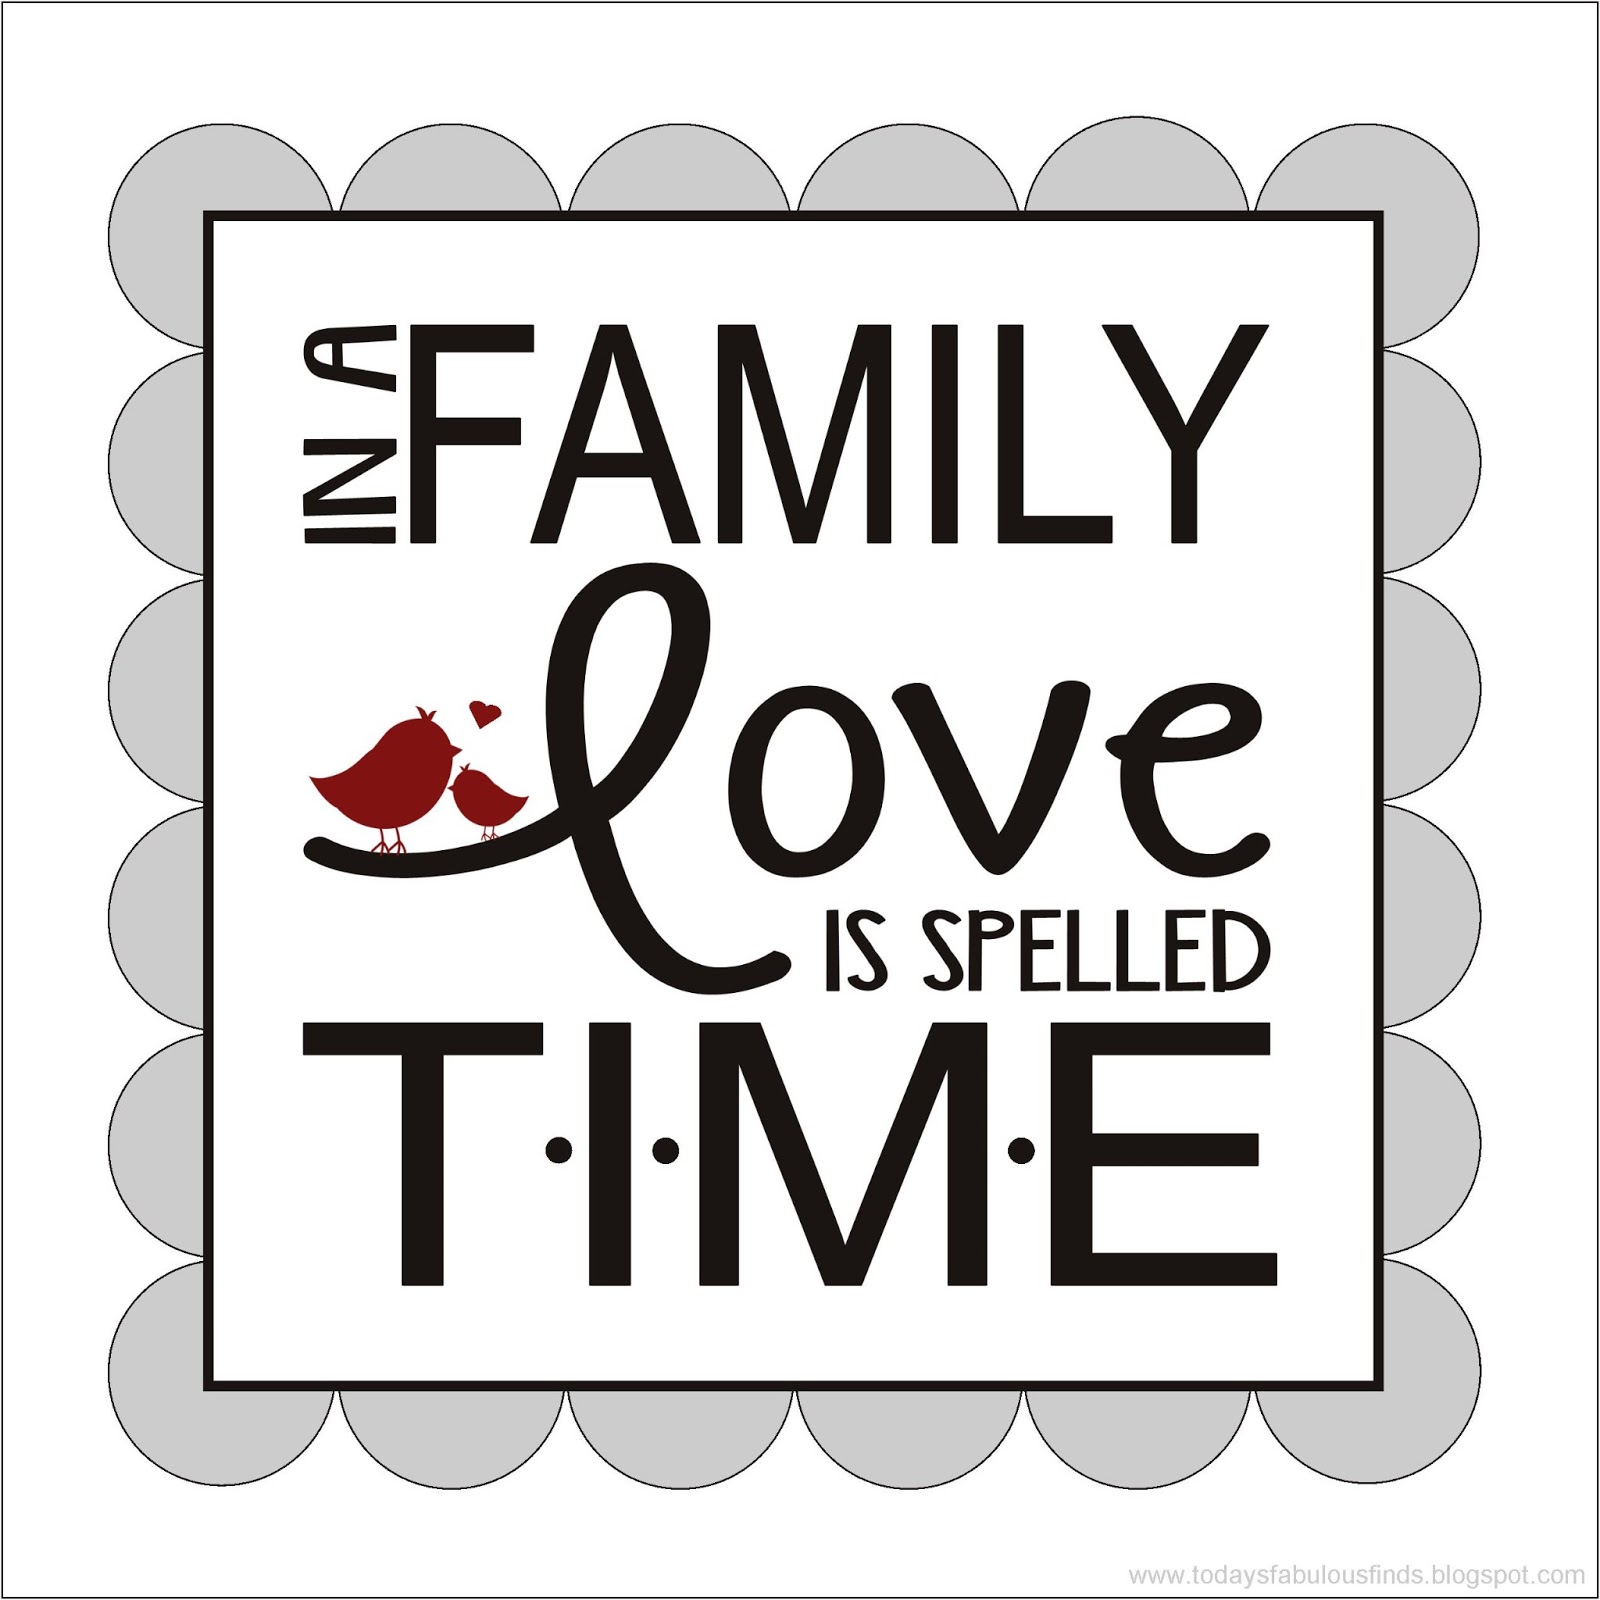 Today's Fabulous Finds: Free Prints: In A Family Love is Spelled T-I-M-E